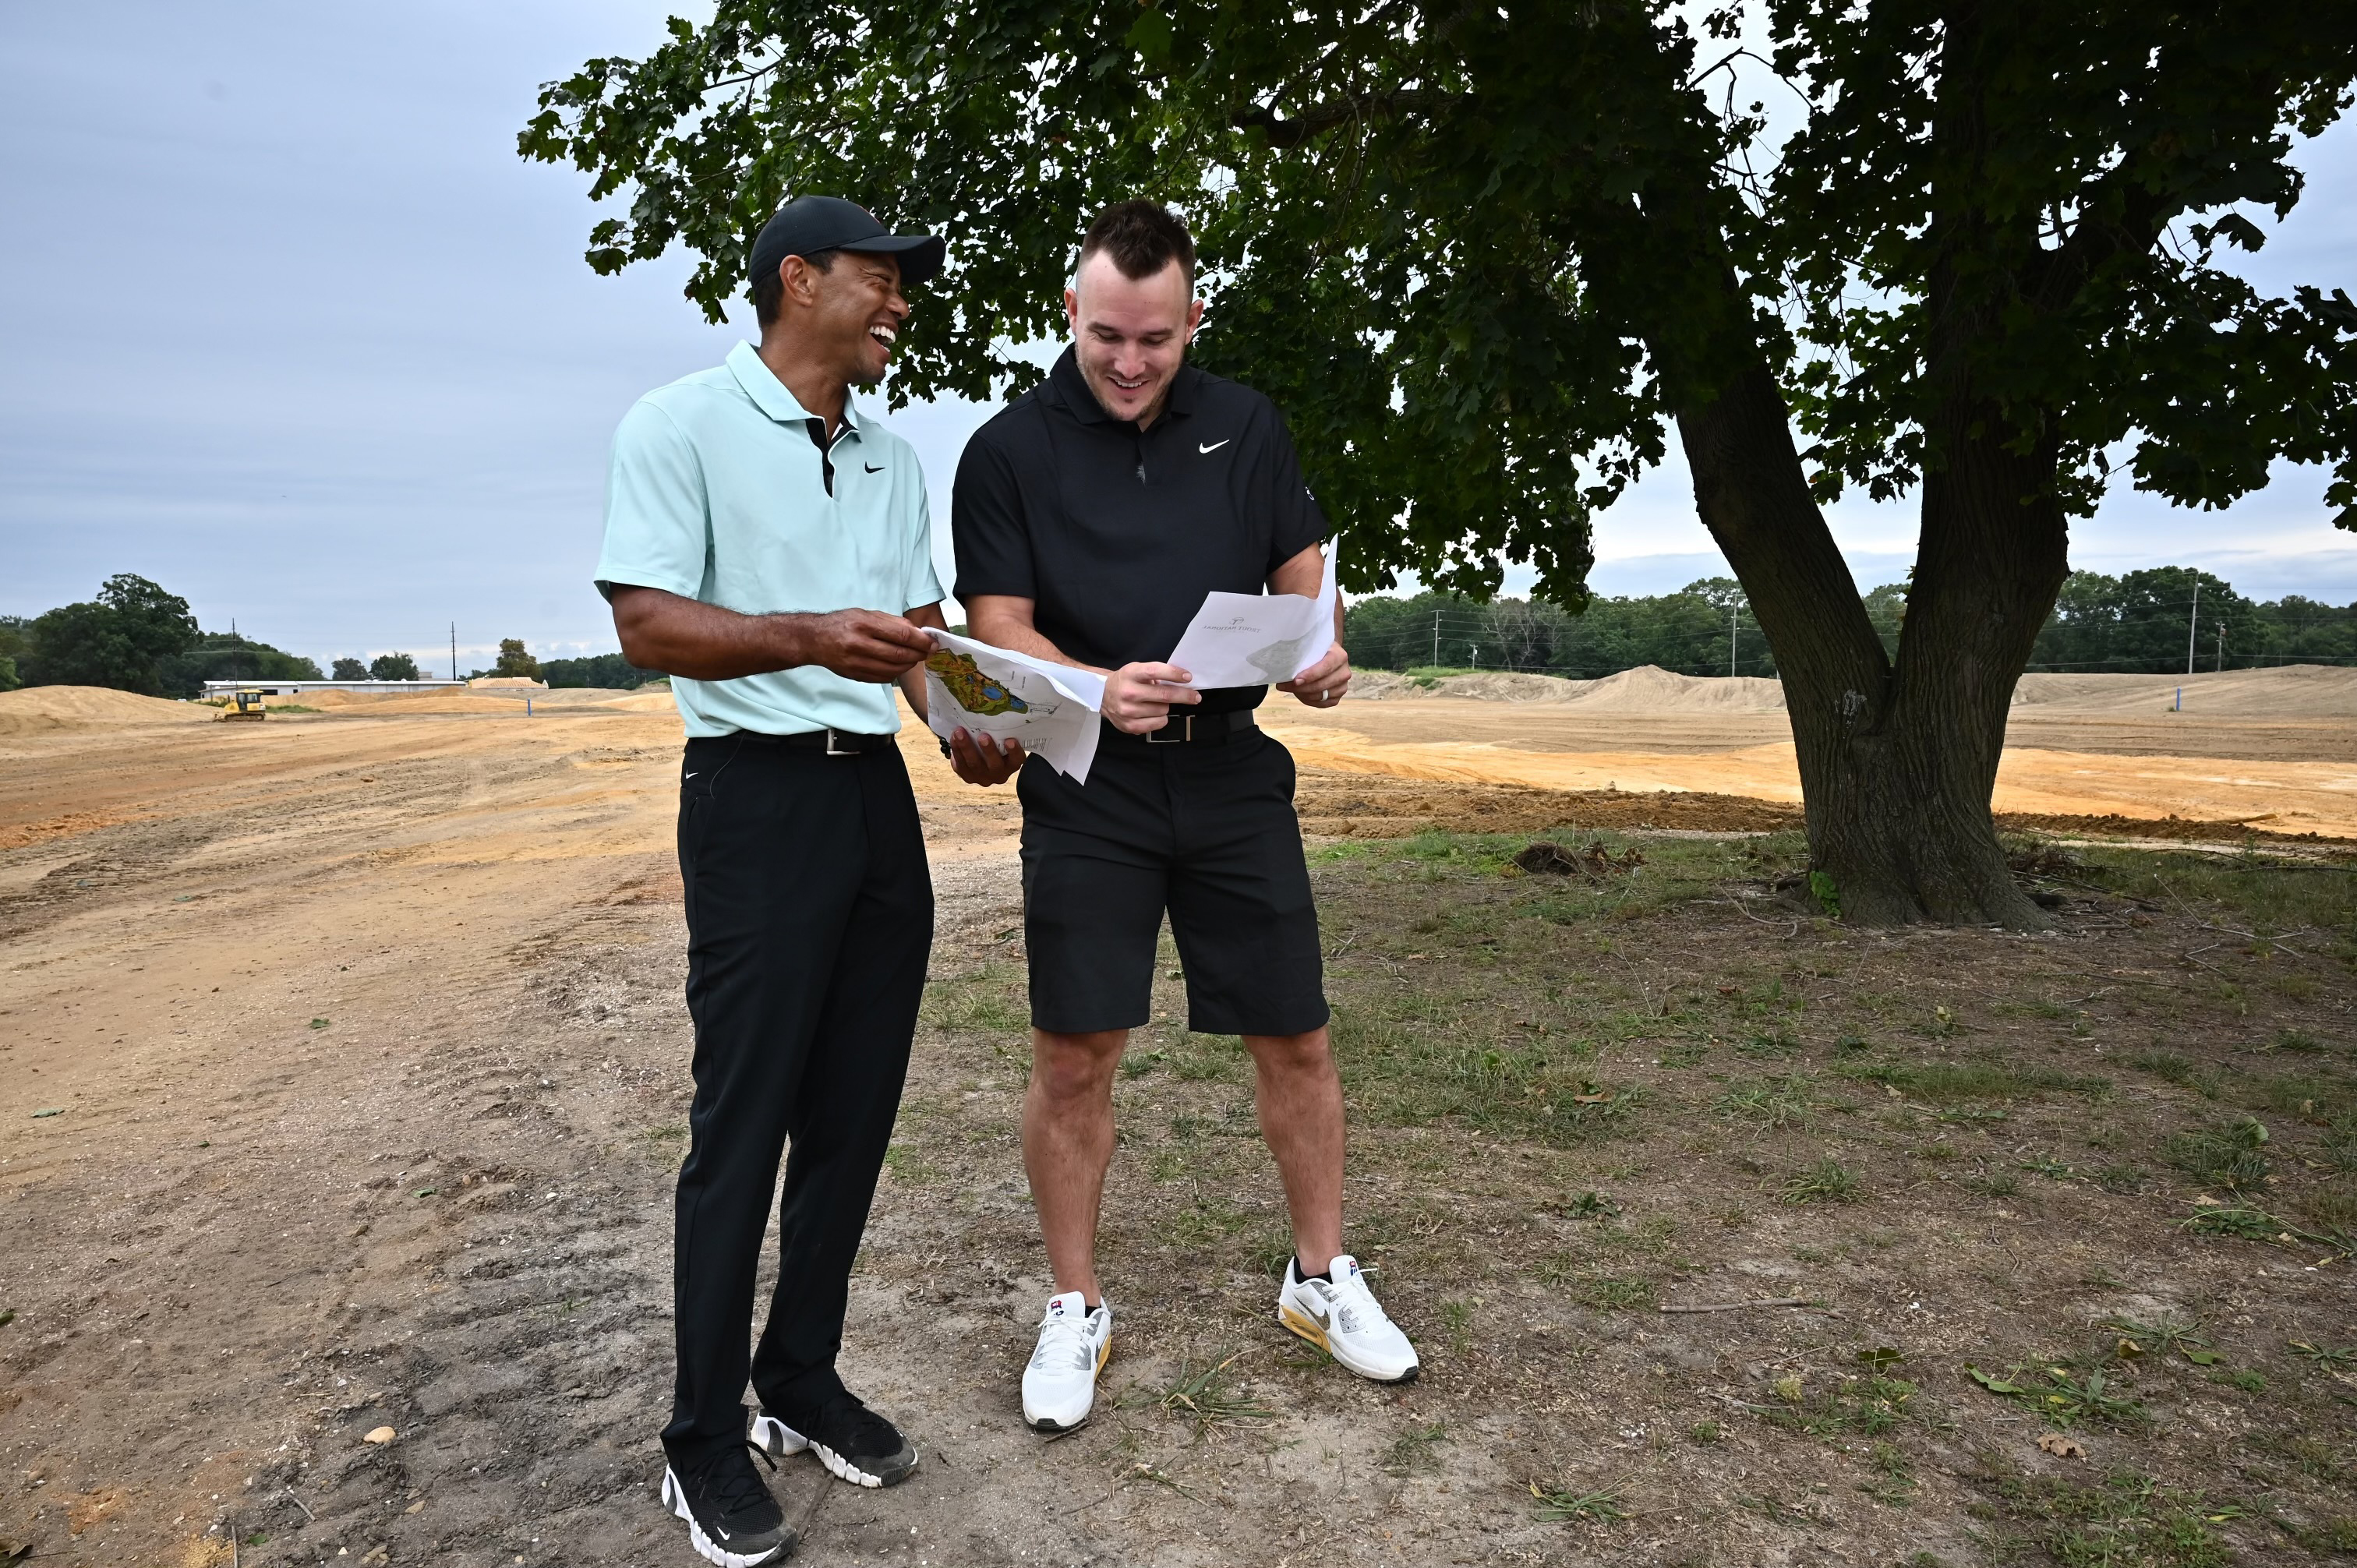 Tiger Woods and Mike Trout just revealed more details about their new golf  course, Trout National | Courses | GolfDigest.com